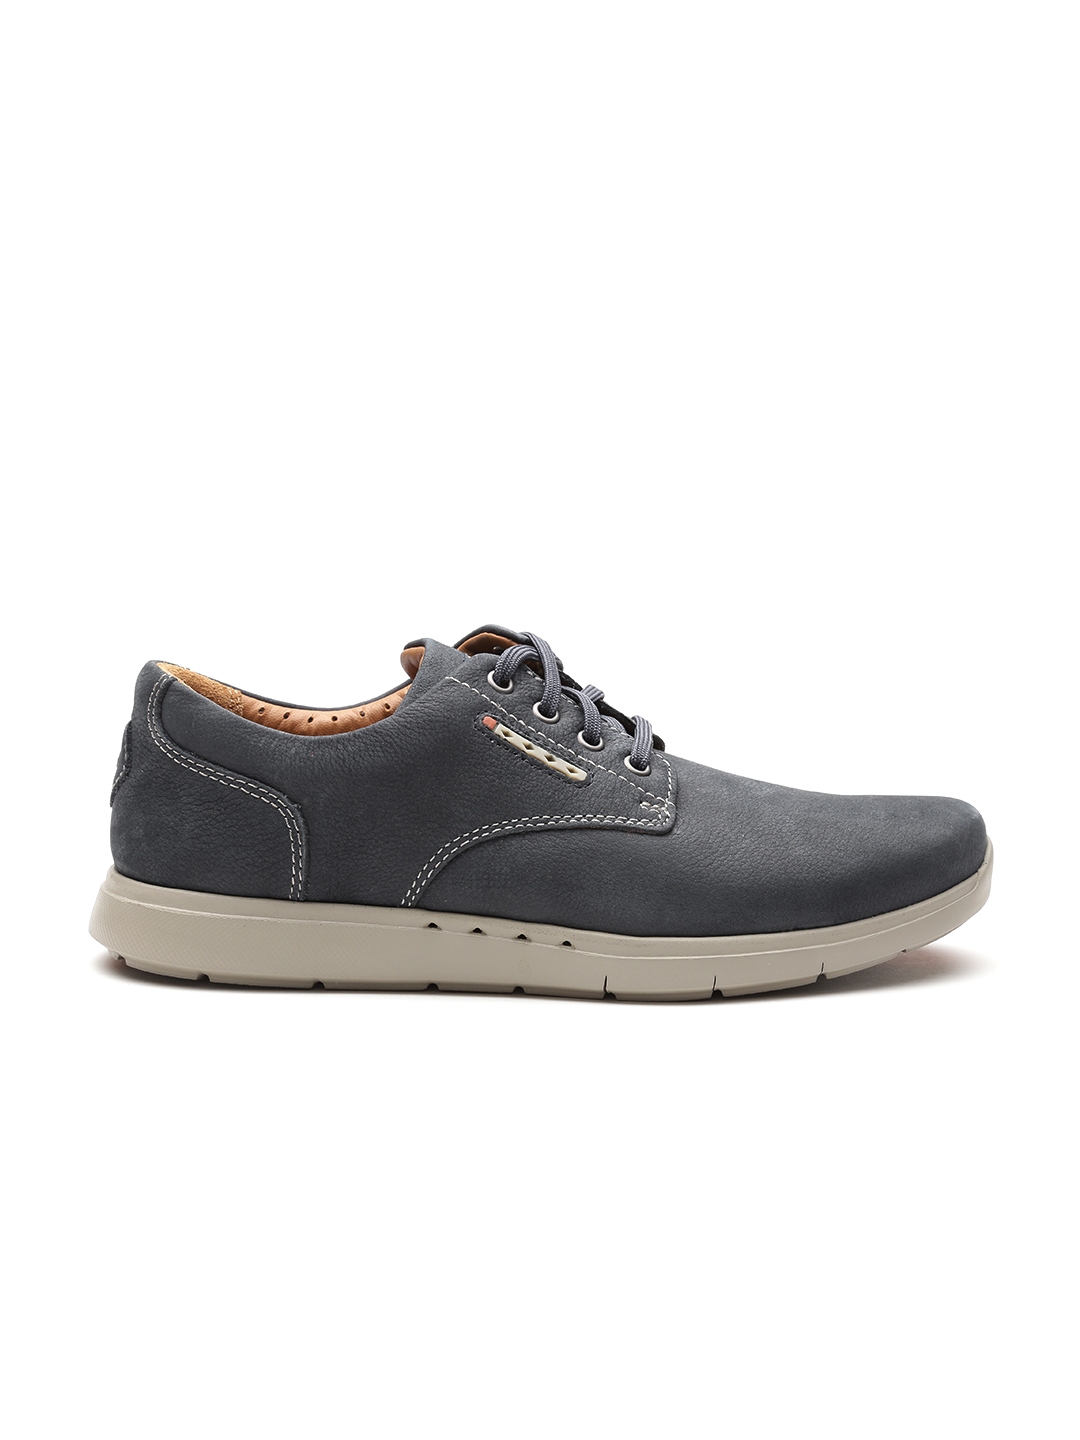 Buy Clarks Men Navy Blue Nubuck Leather Sneakers - Casual Shoes for Men ...